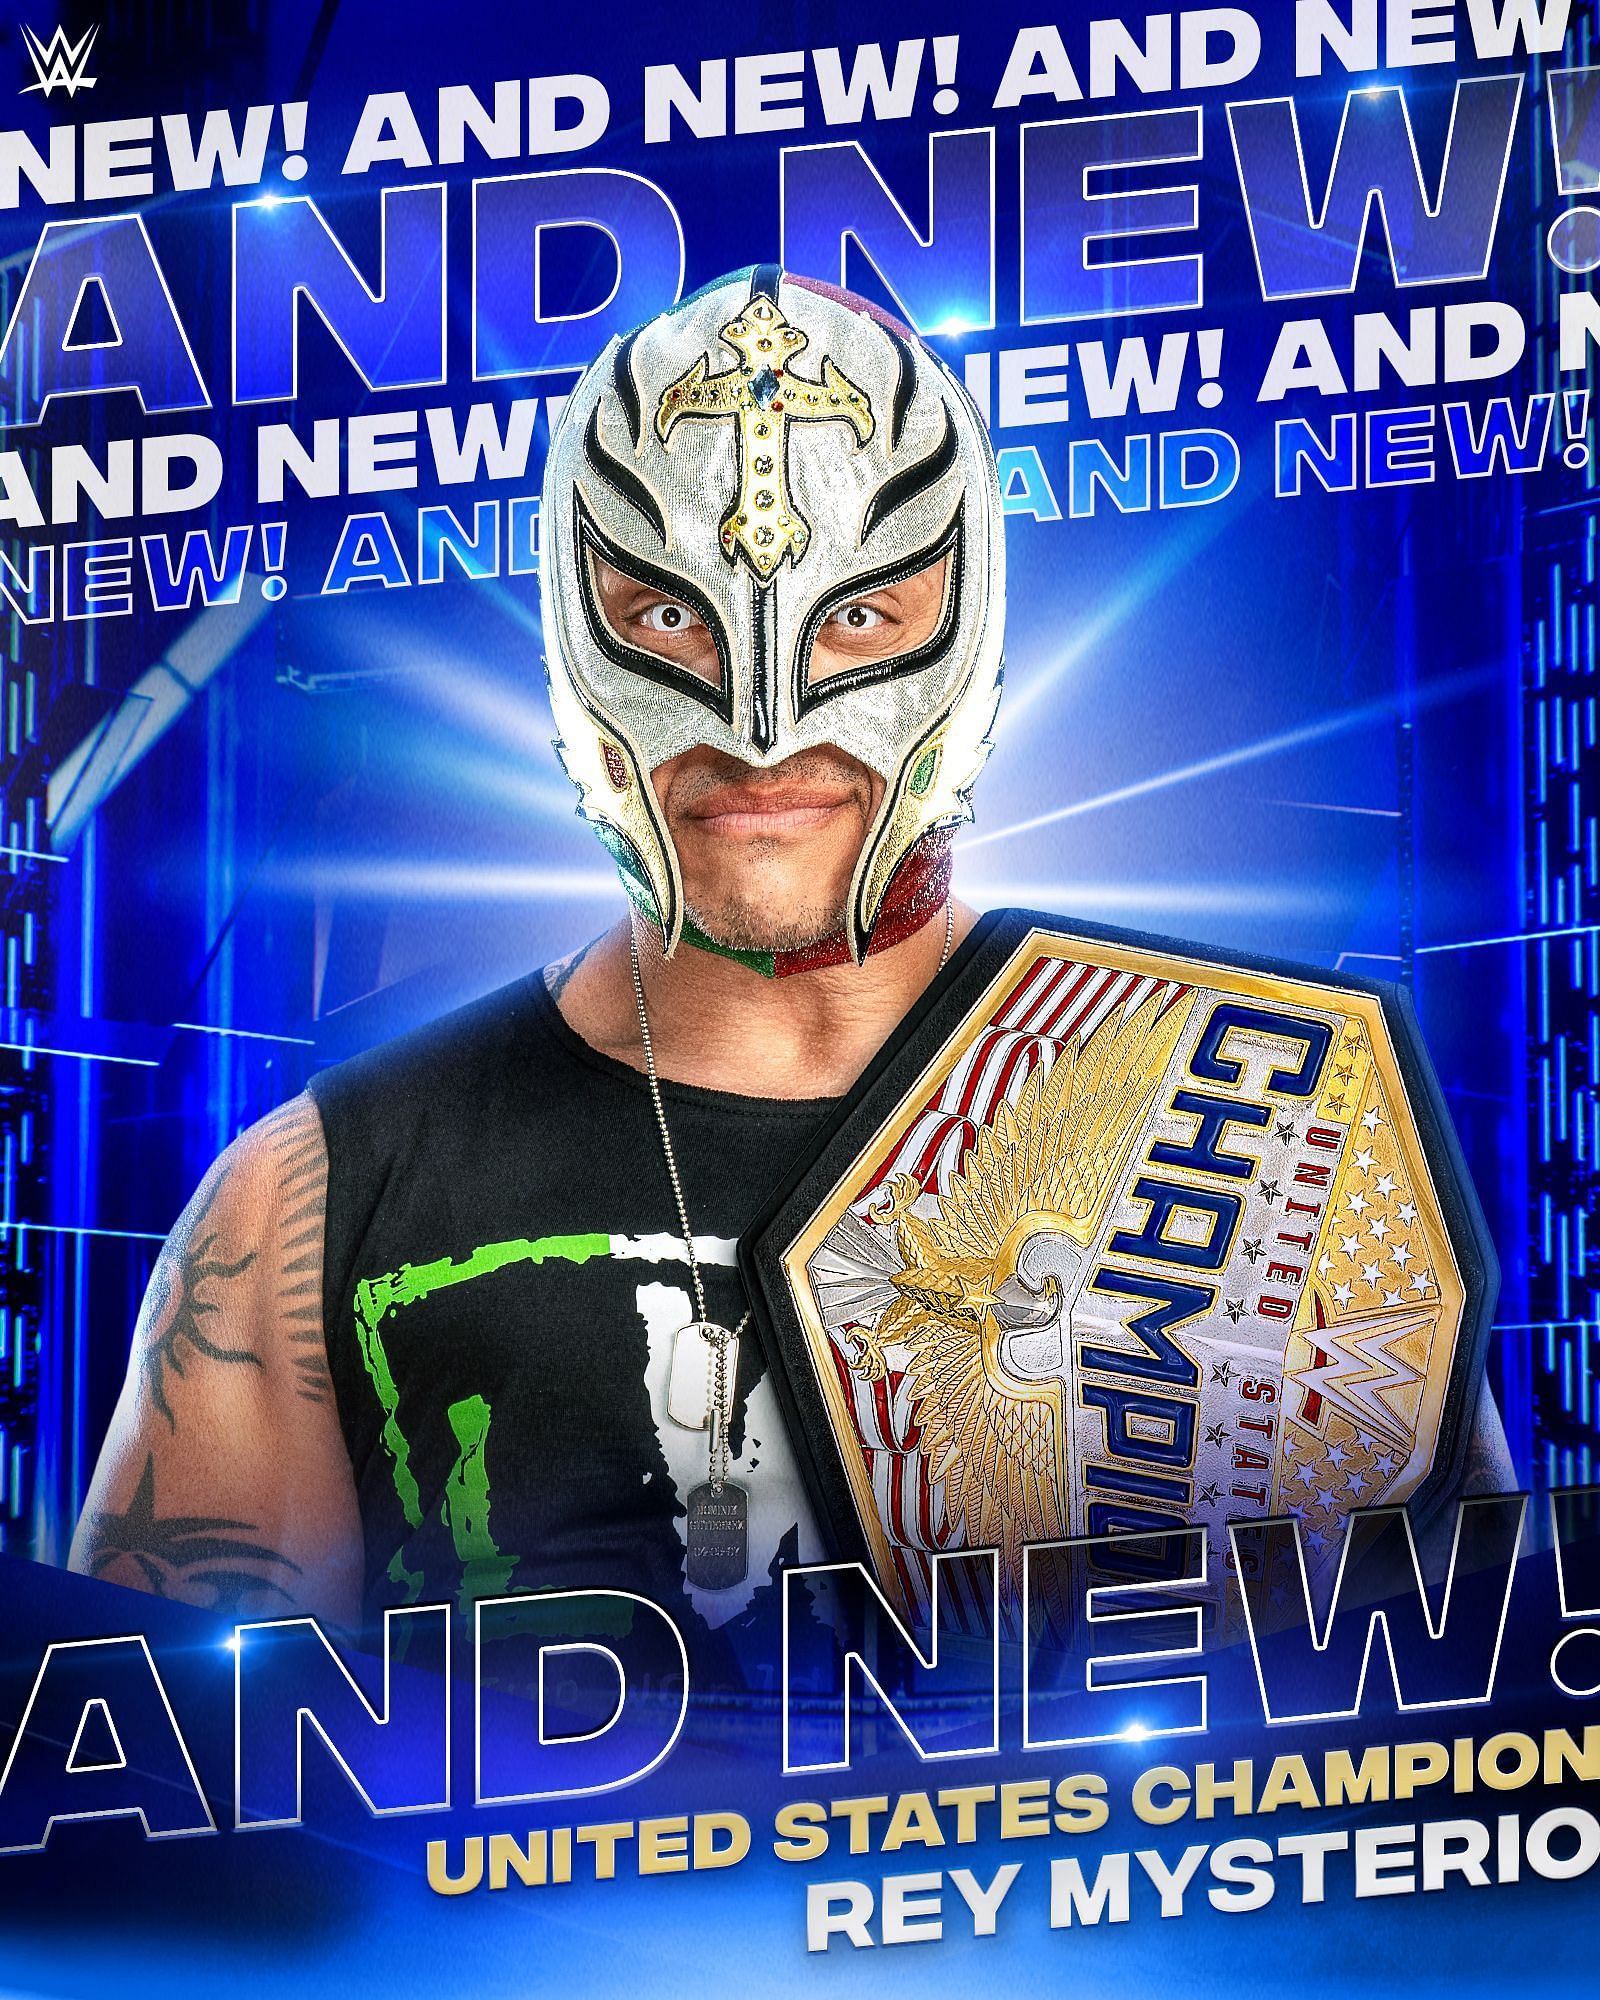 We got a new champion tonight on SmackDown!